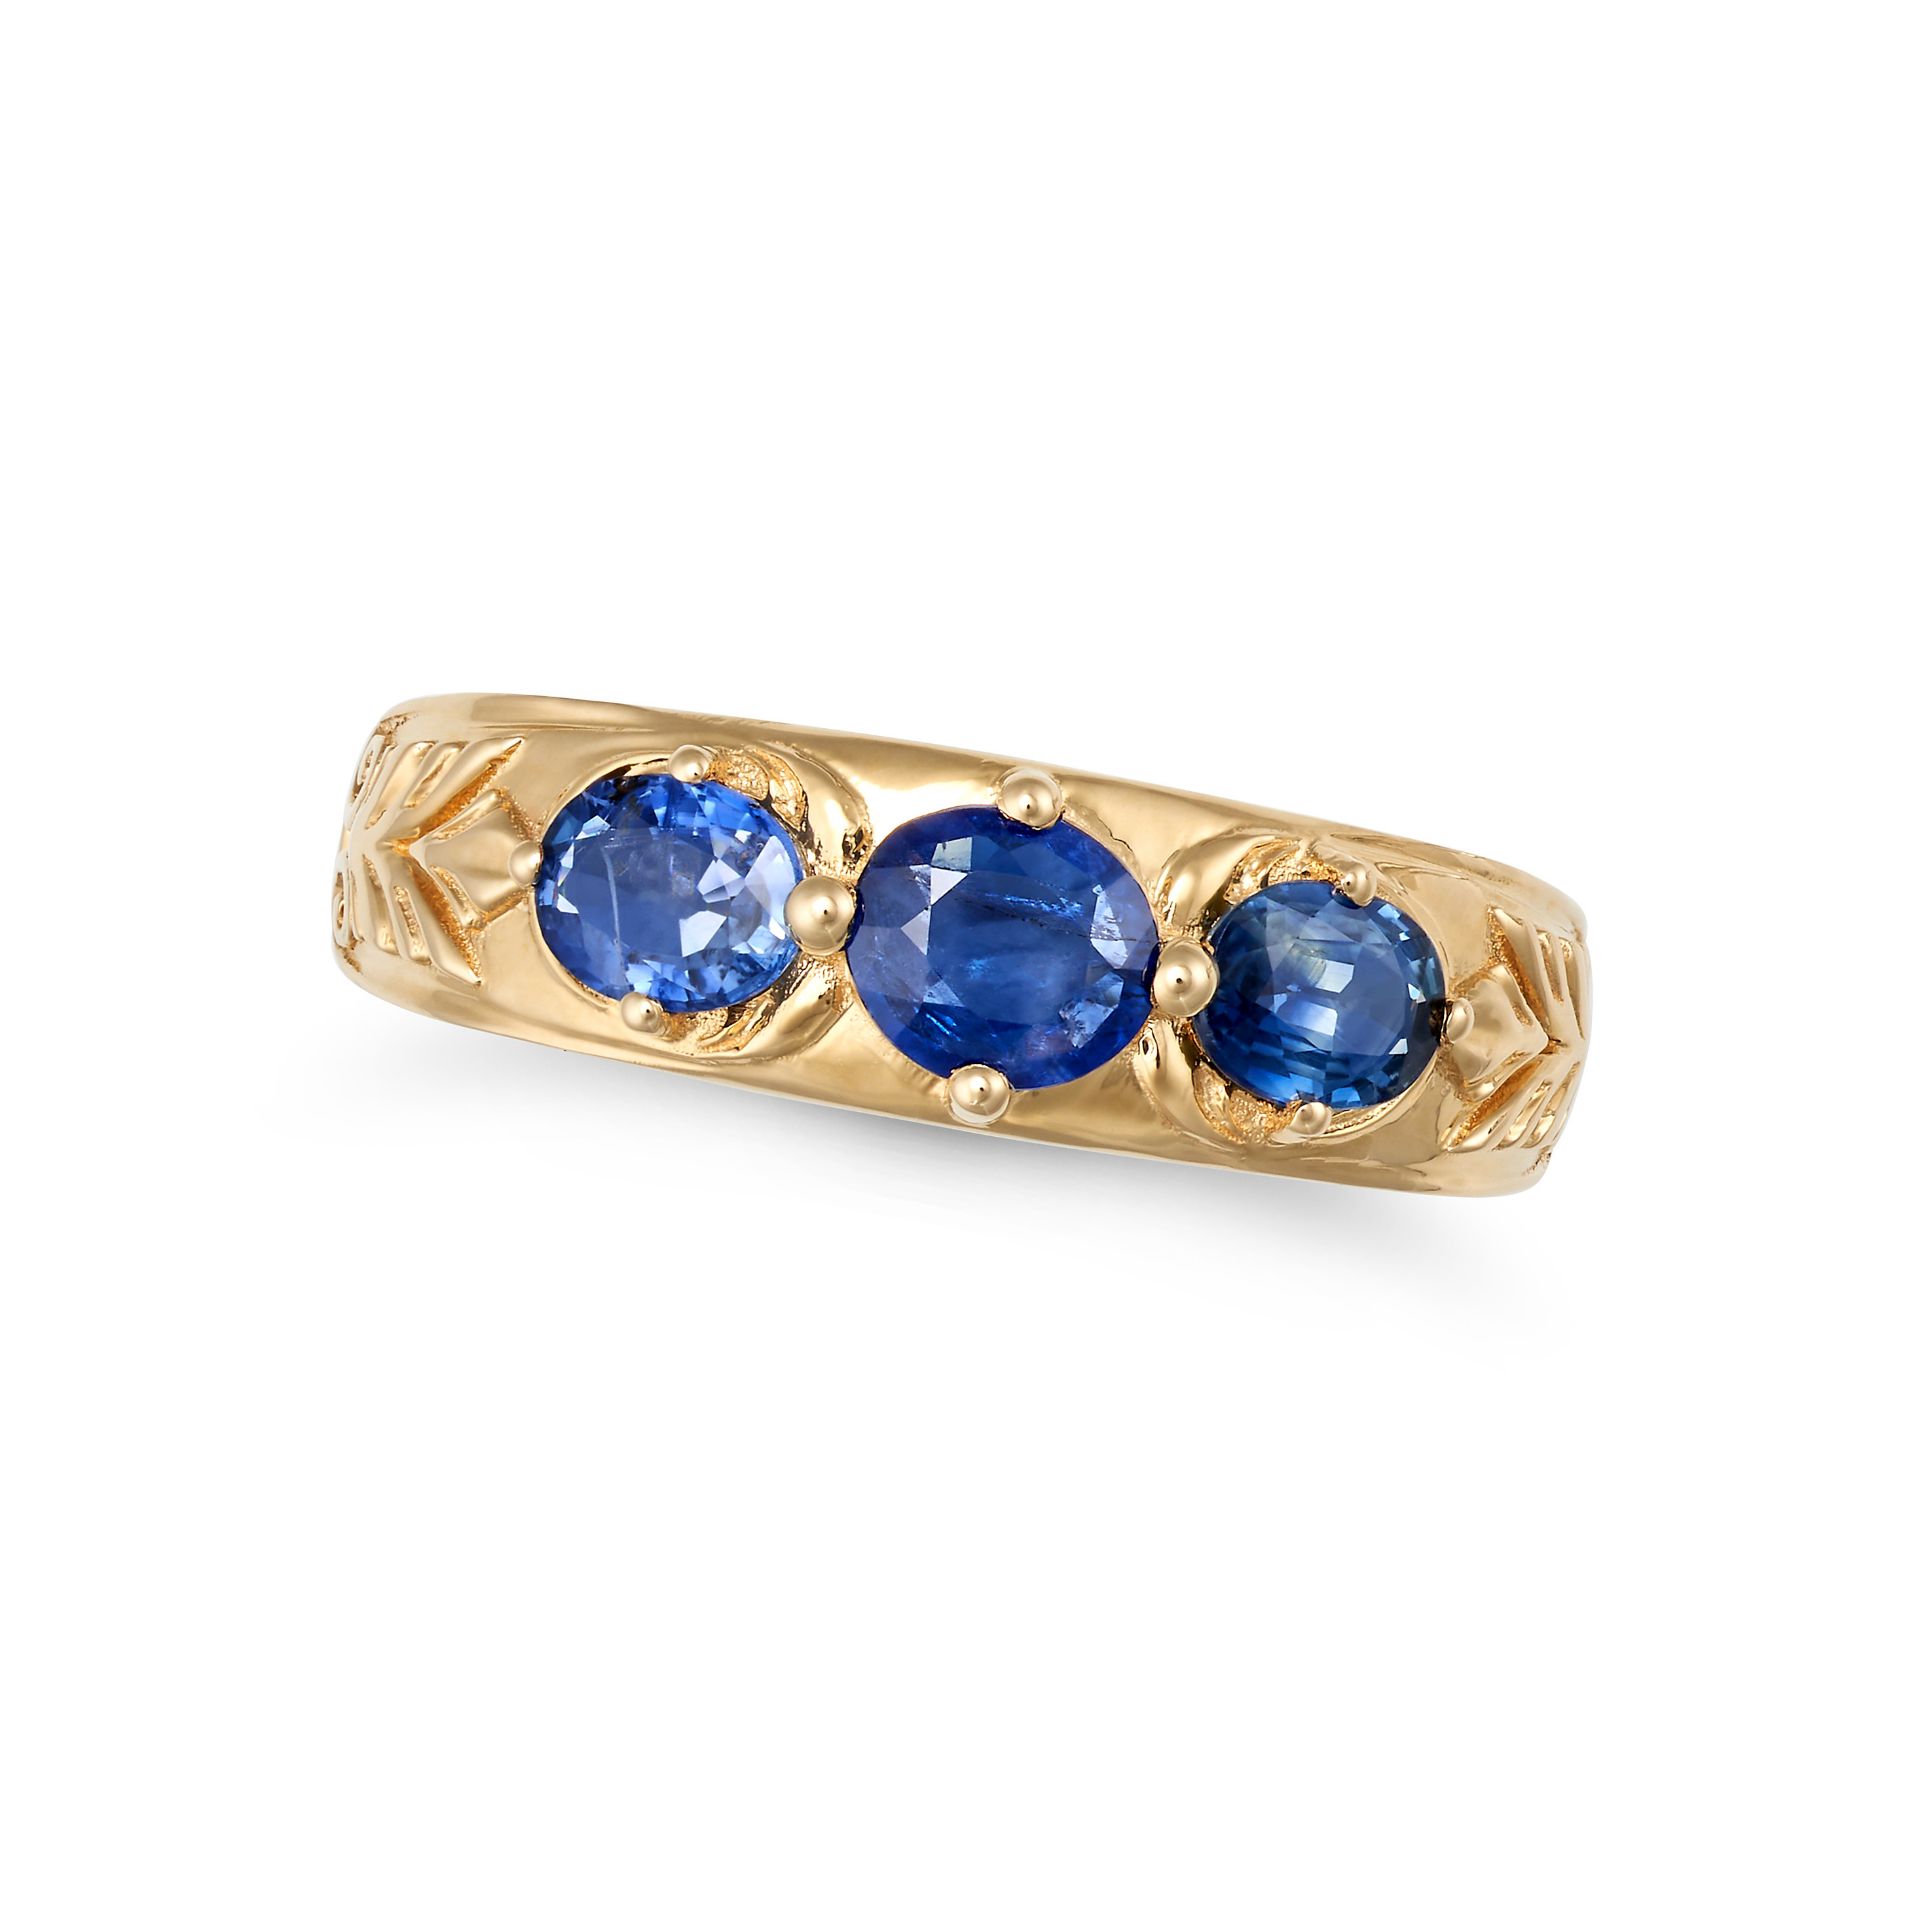 A SAPPHIRE THREE STONE RING in 18ct yellow gold, set with three oval cut sapphires, inscribed S1....